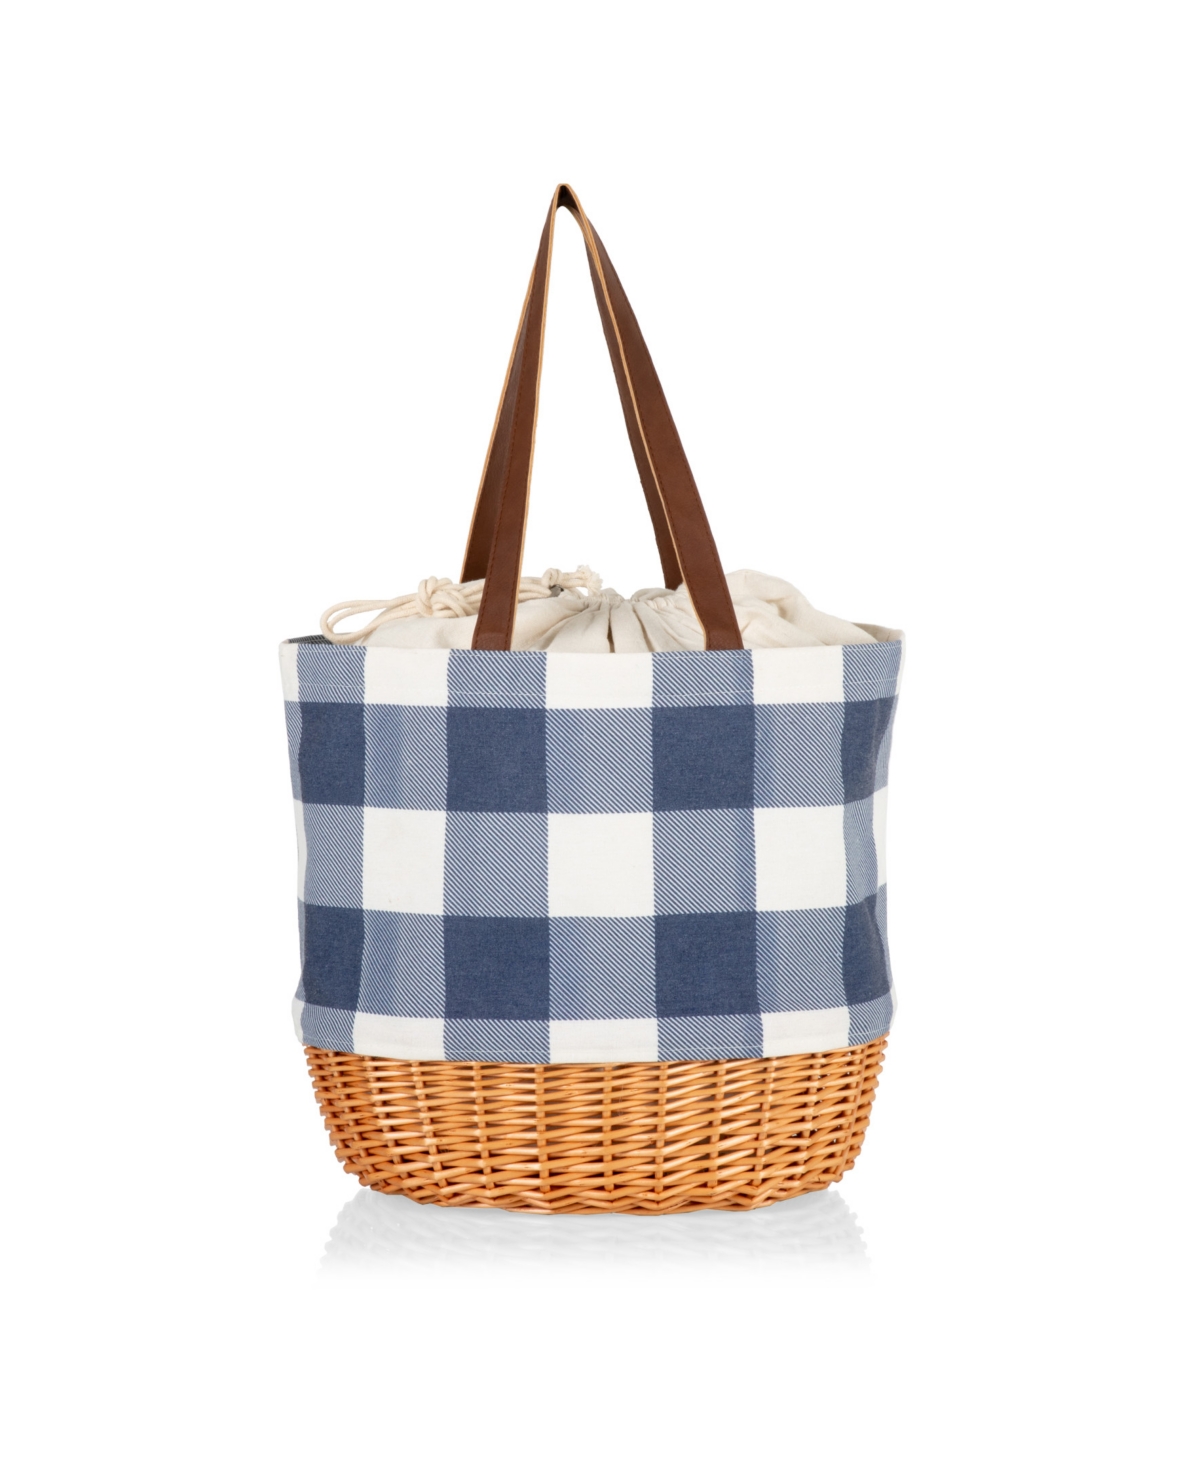 Picnic Time Coronado Canvas And Willow Basket Tote Bag In Blue And White With Beige Accents